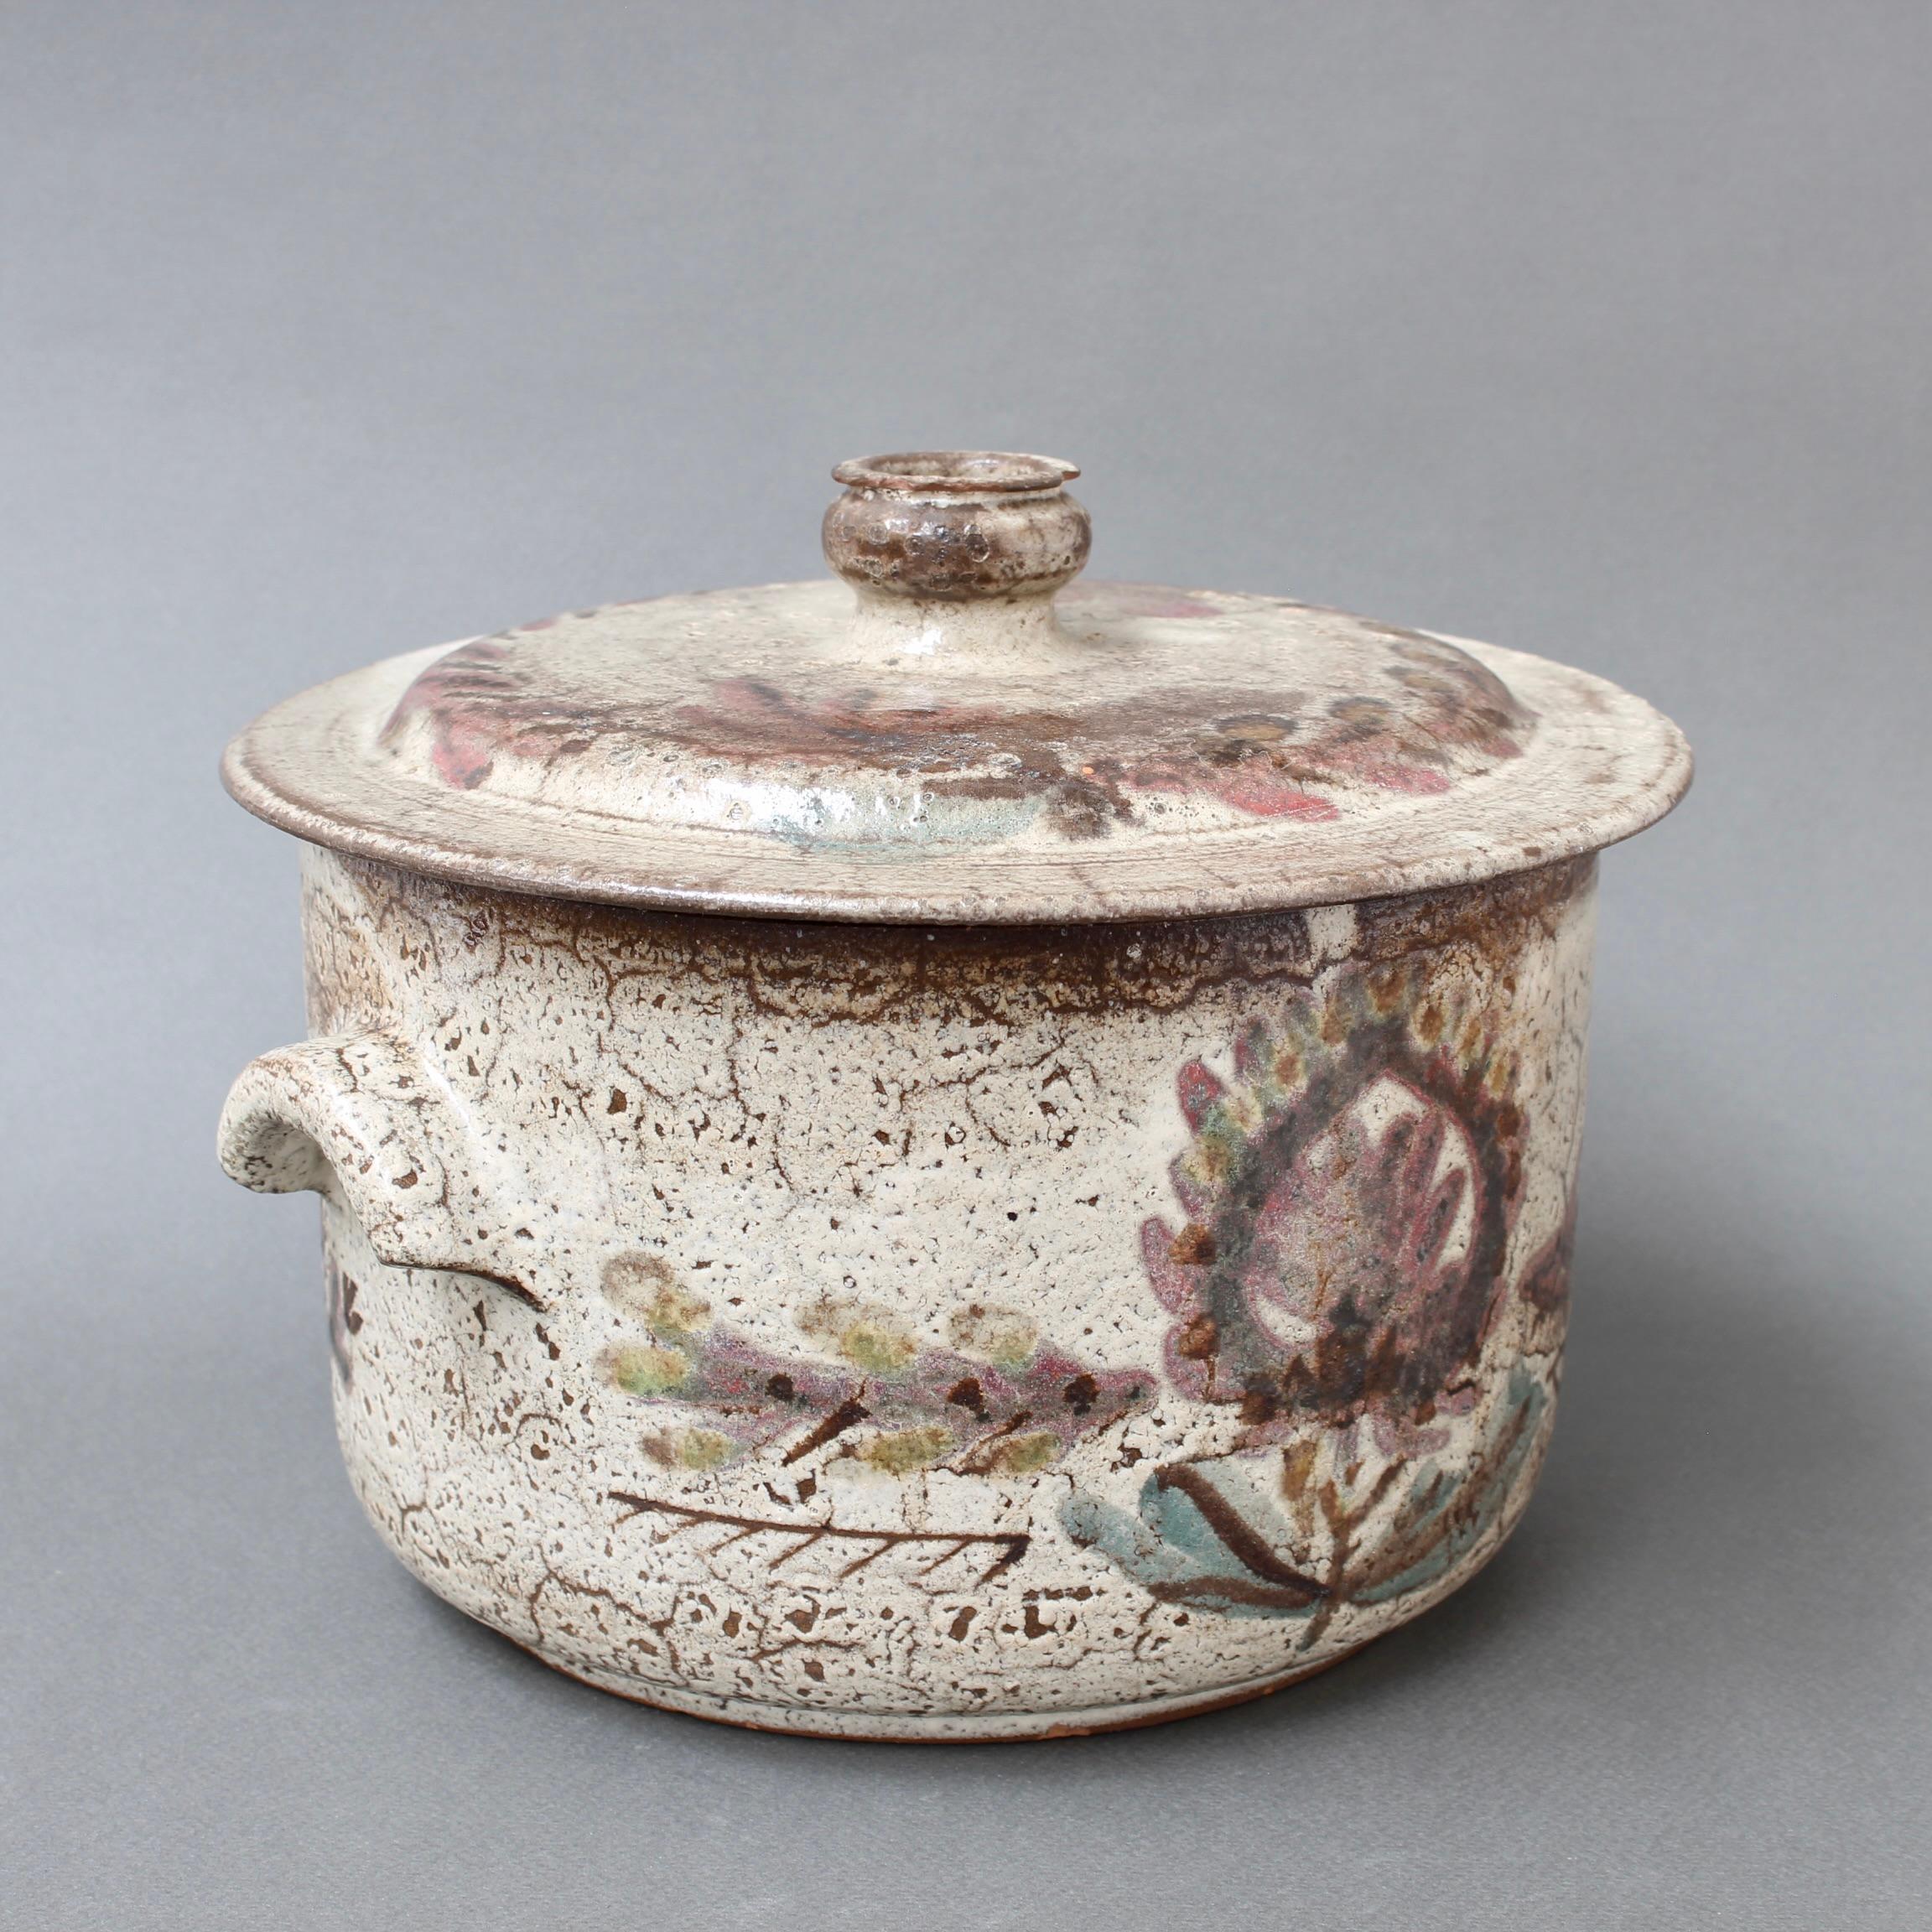 Rustic Vintage French Ceramic Casserole with Lid by Gustave Reynaud - Le Mûrier For Sale